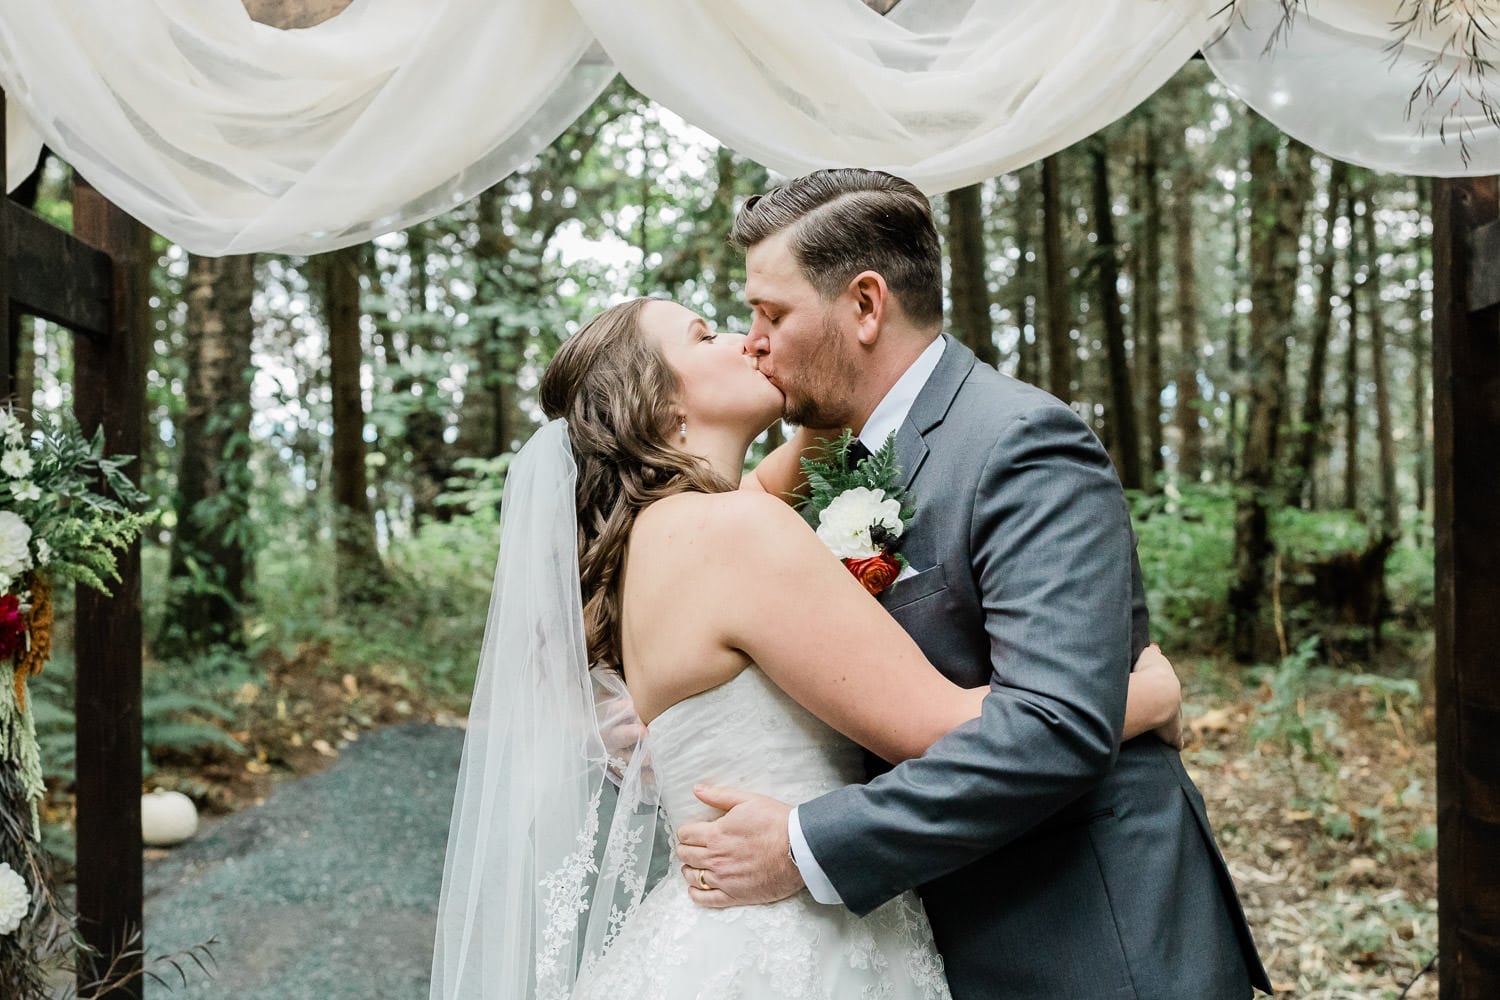 Rustic wedding ceremony photo in Langley and first kiss | Vancouver wedding photographer